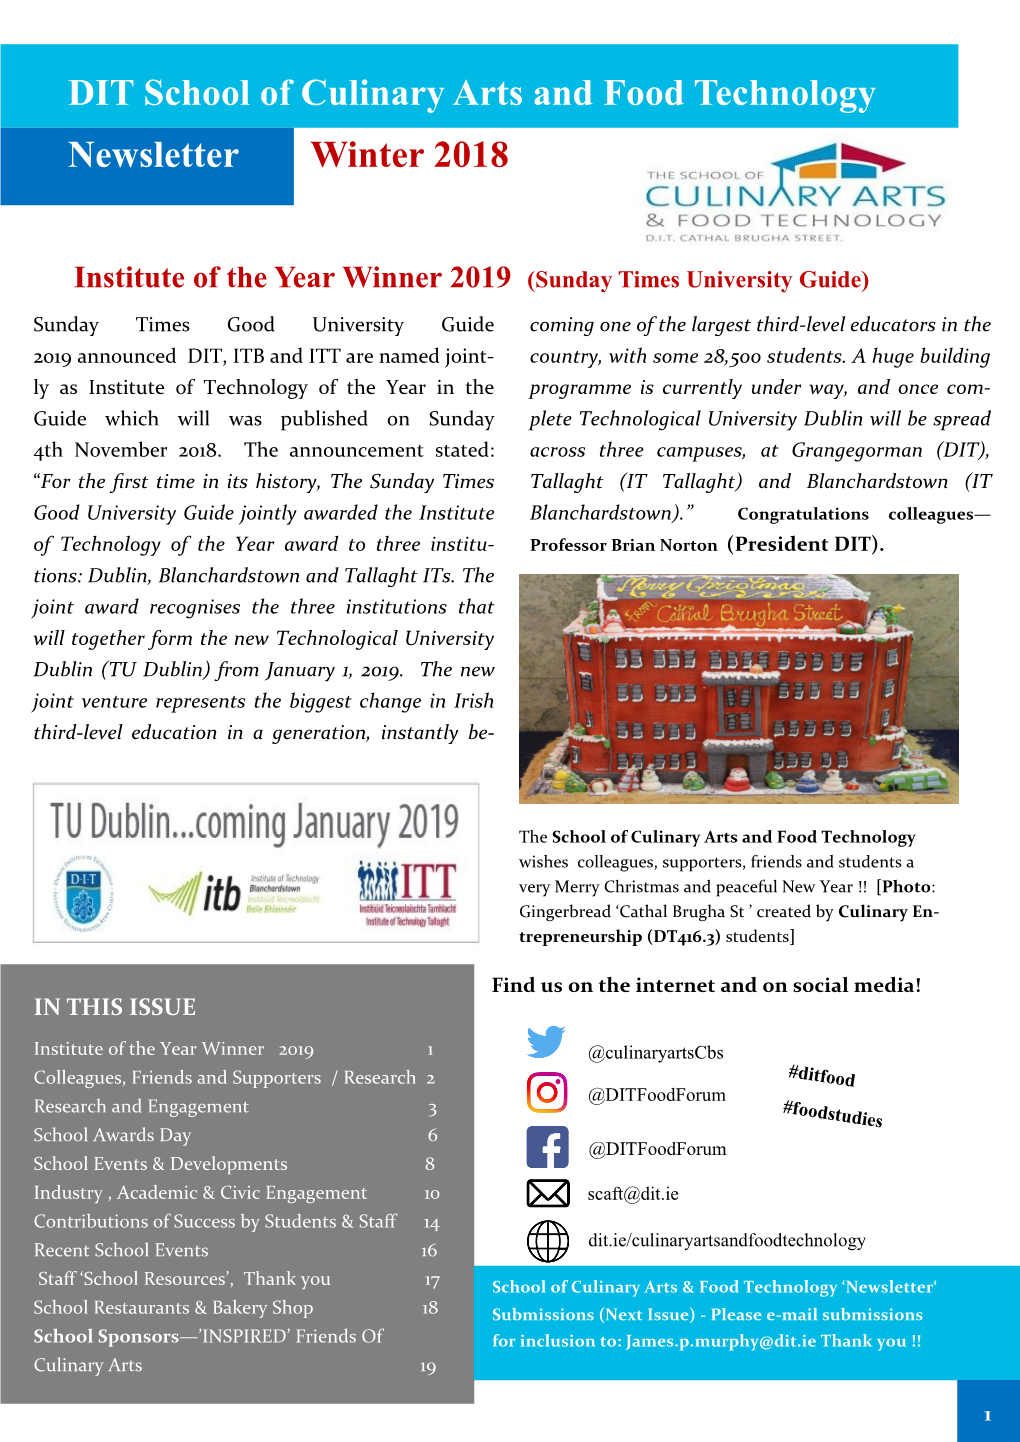 DIT School of Culinary Arts and Food Technology Newsletter Winter 2018